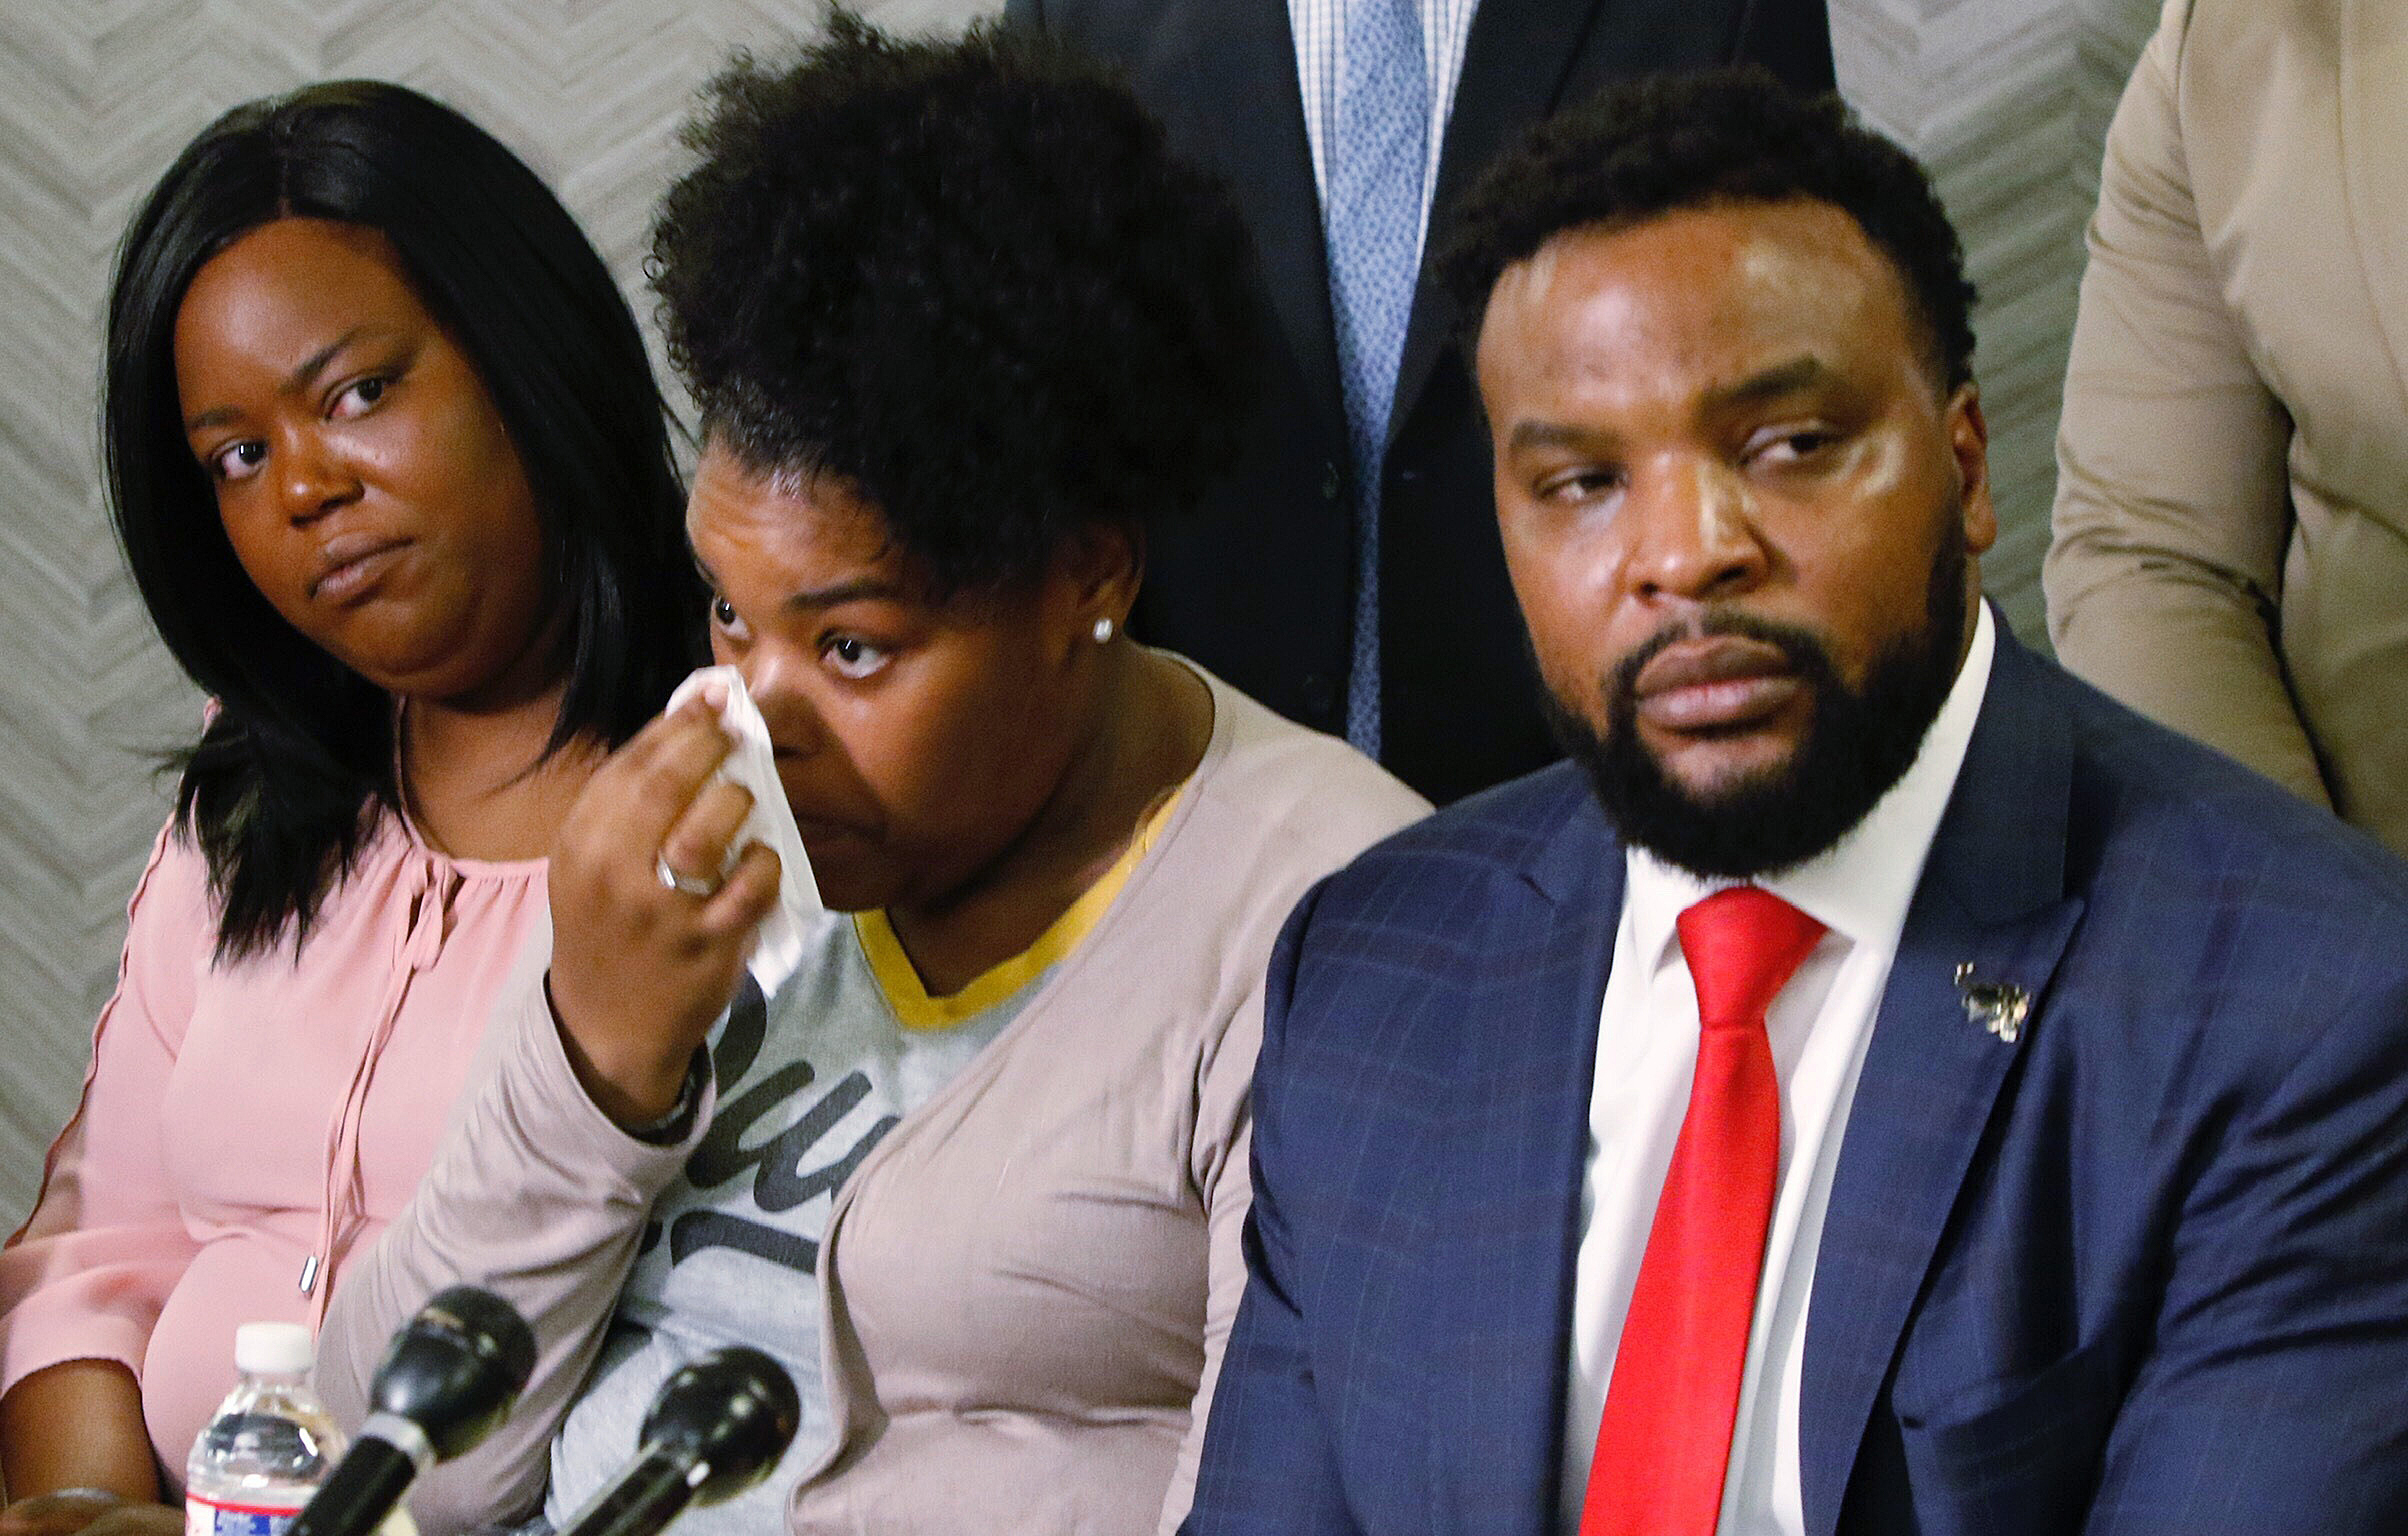 Amber Carr, center, wipes a tear as her sister, Ashley Carr, left, and attorney Lee Merritt, right, listen to Amber and Ashley's brother Adarius Carr talk about their sister Atatiana Jefferson during a news conference, Monday, Oct. 14, 2019, in downtown Dallas. (Irwin Thompson—AP)